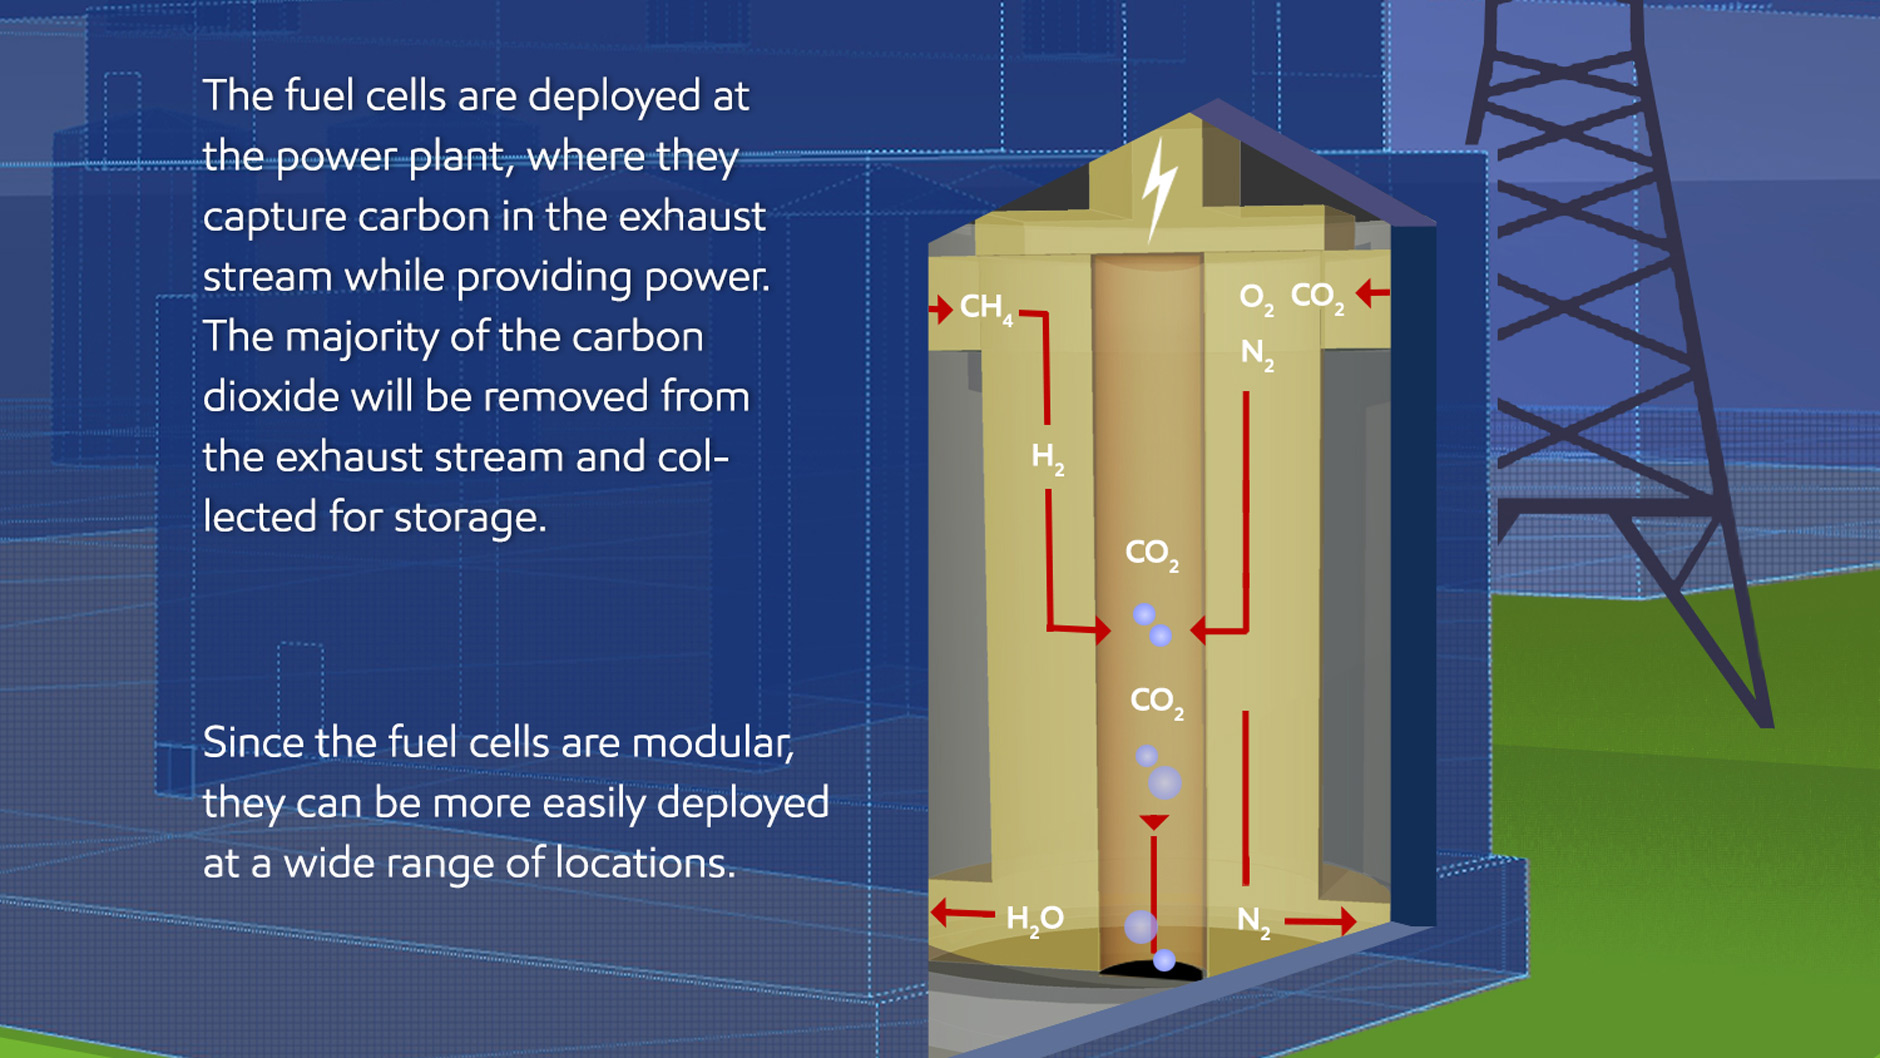 Download our graphic below to learn more about CCS